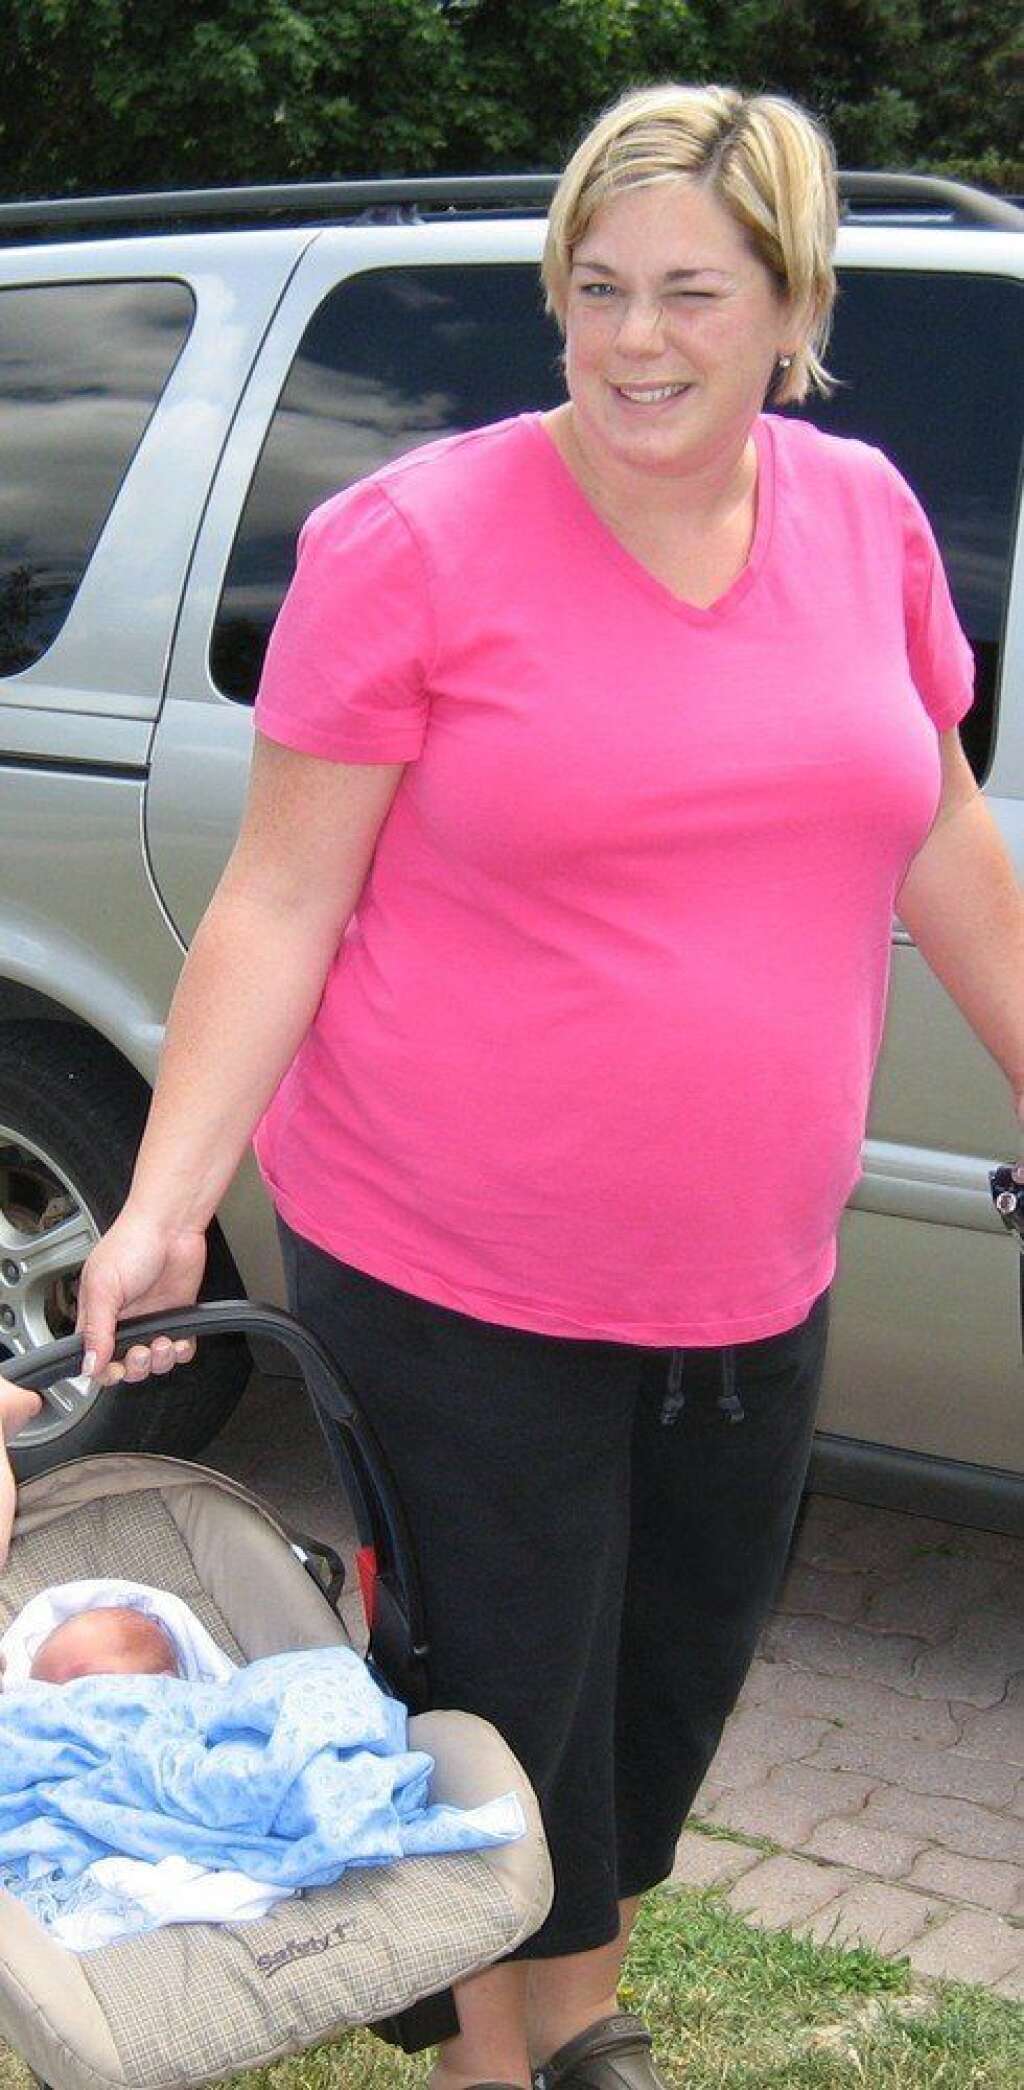 Kaila Beattie BEFORE - <a href="http://www.huffingtonpost.ca/2013/04/23/kaila-beattie-lost-100-pounds_n_3116555.html" target="_blank">Read the story here.</a>